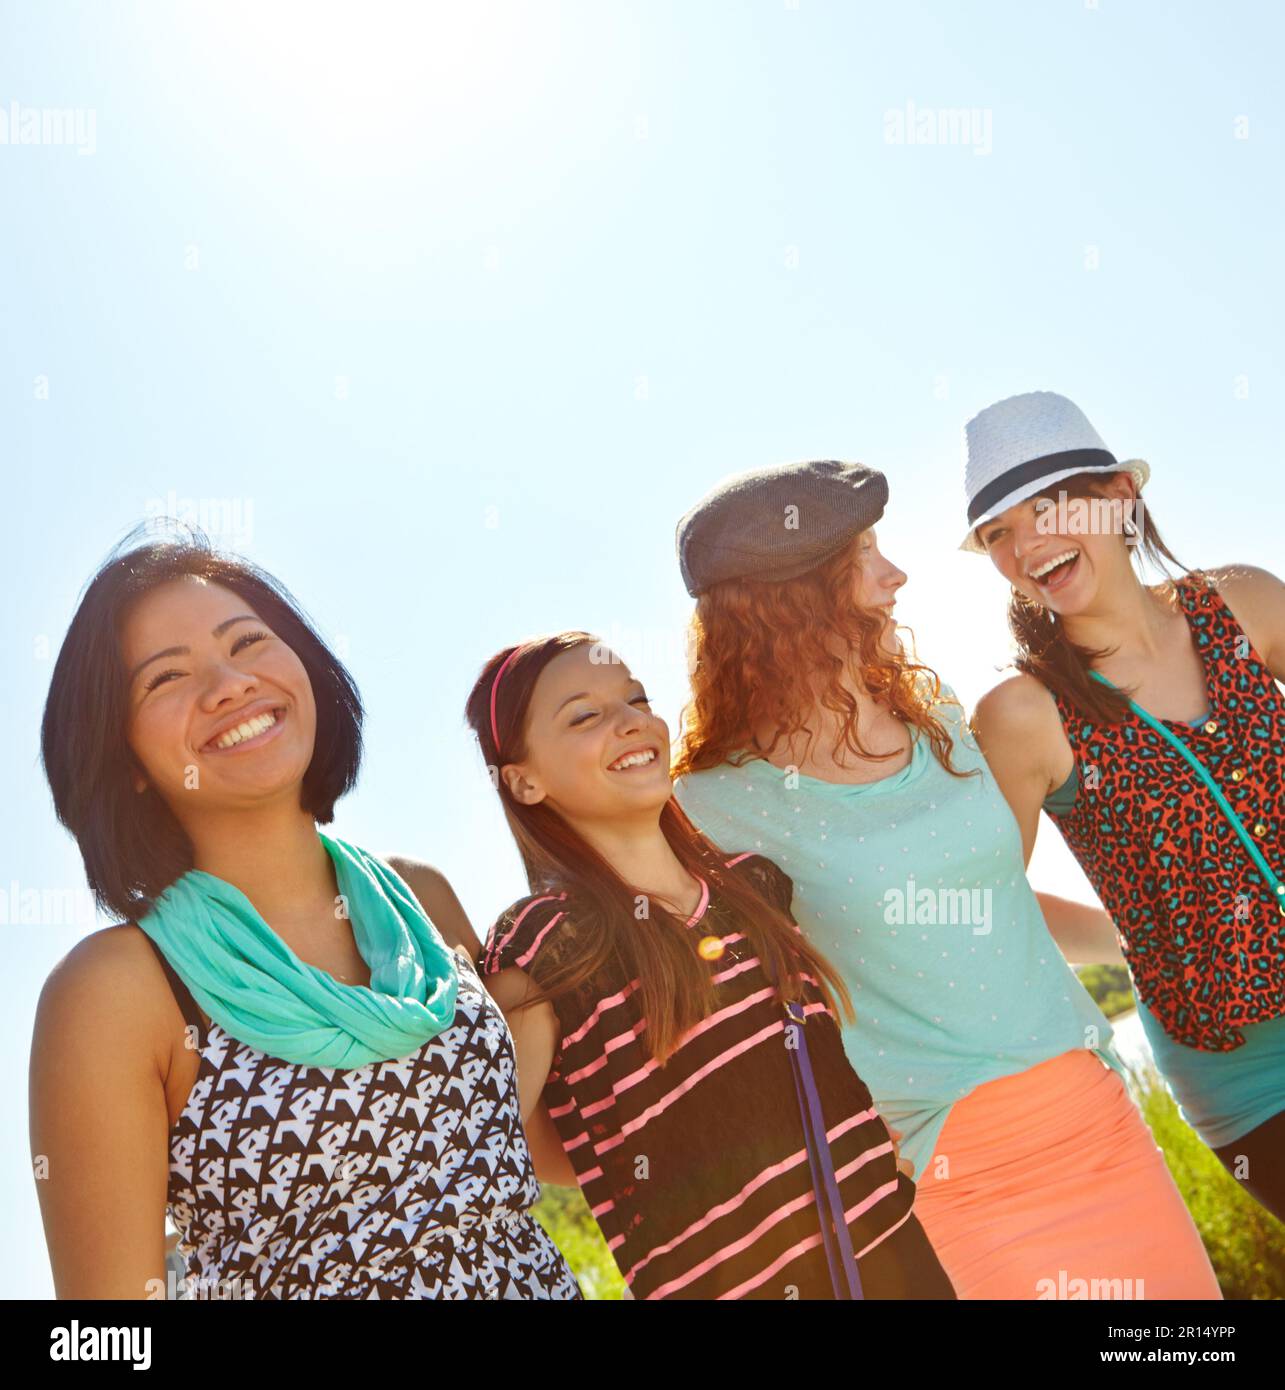 Strolling in the summer sun. Low-angle view of a group of teeange girls walking outside with their arms entwined. Stock Photo